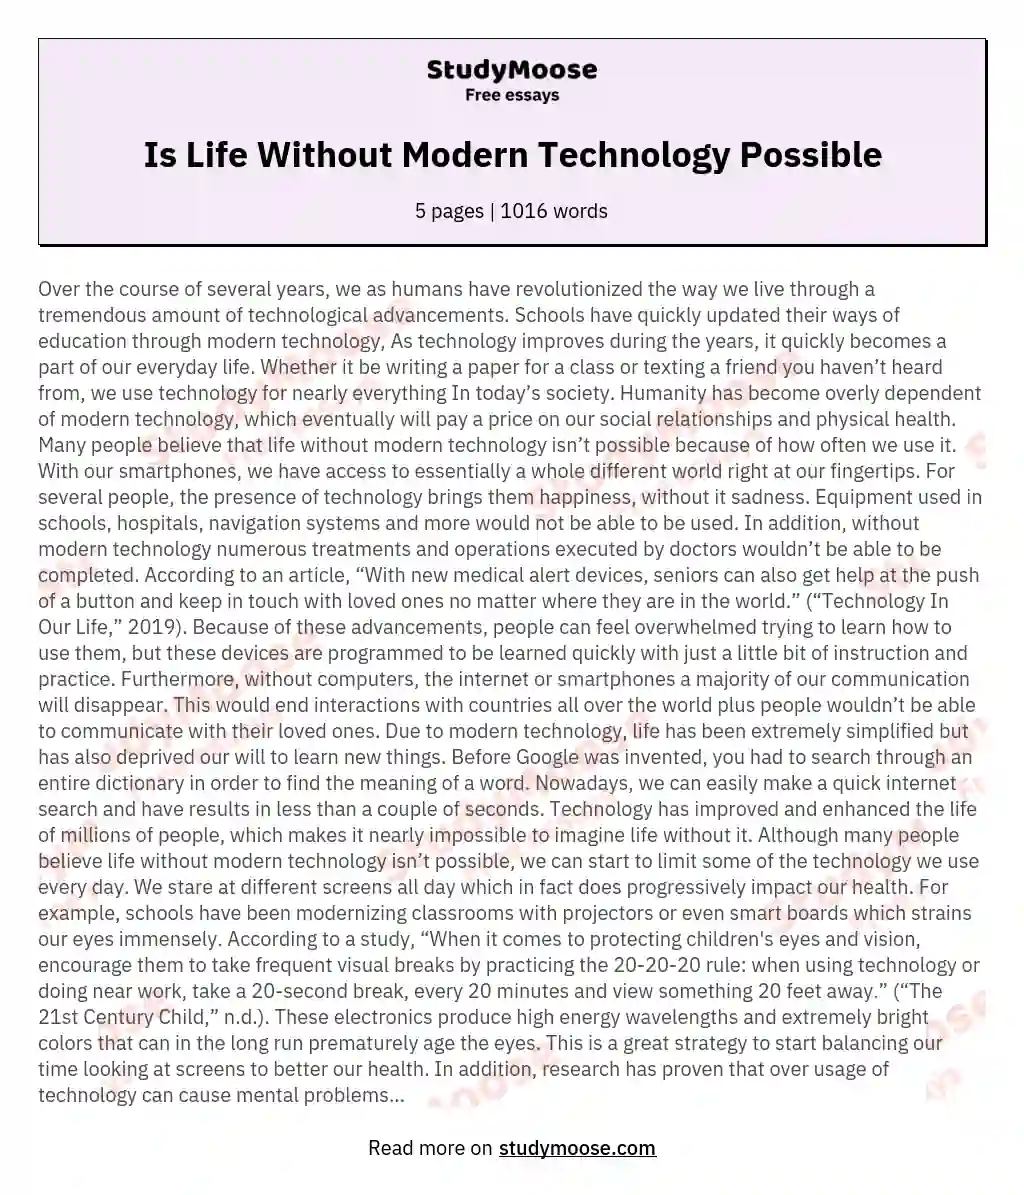 Is Life Without Modern Technology Possible essay